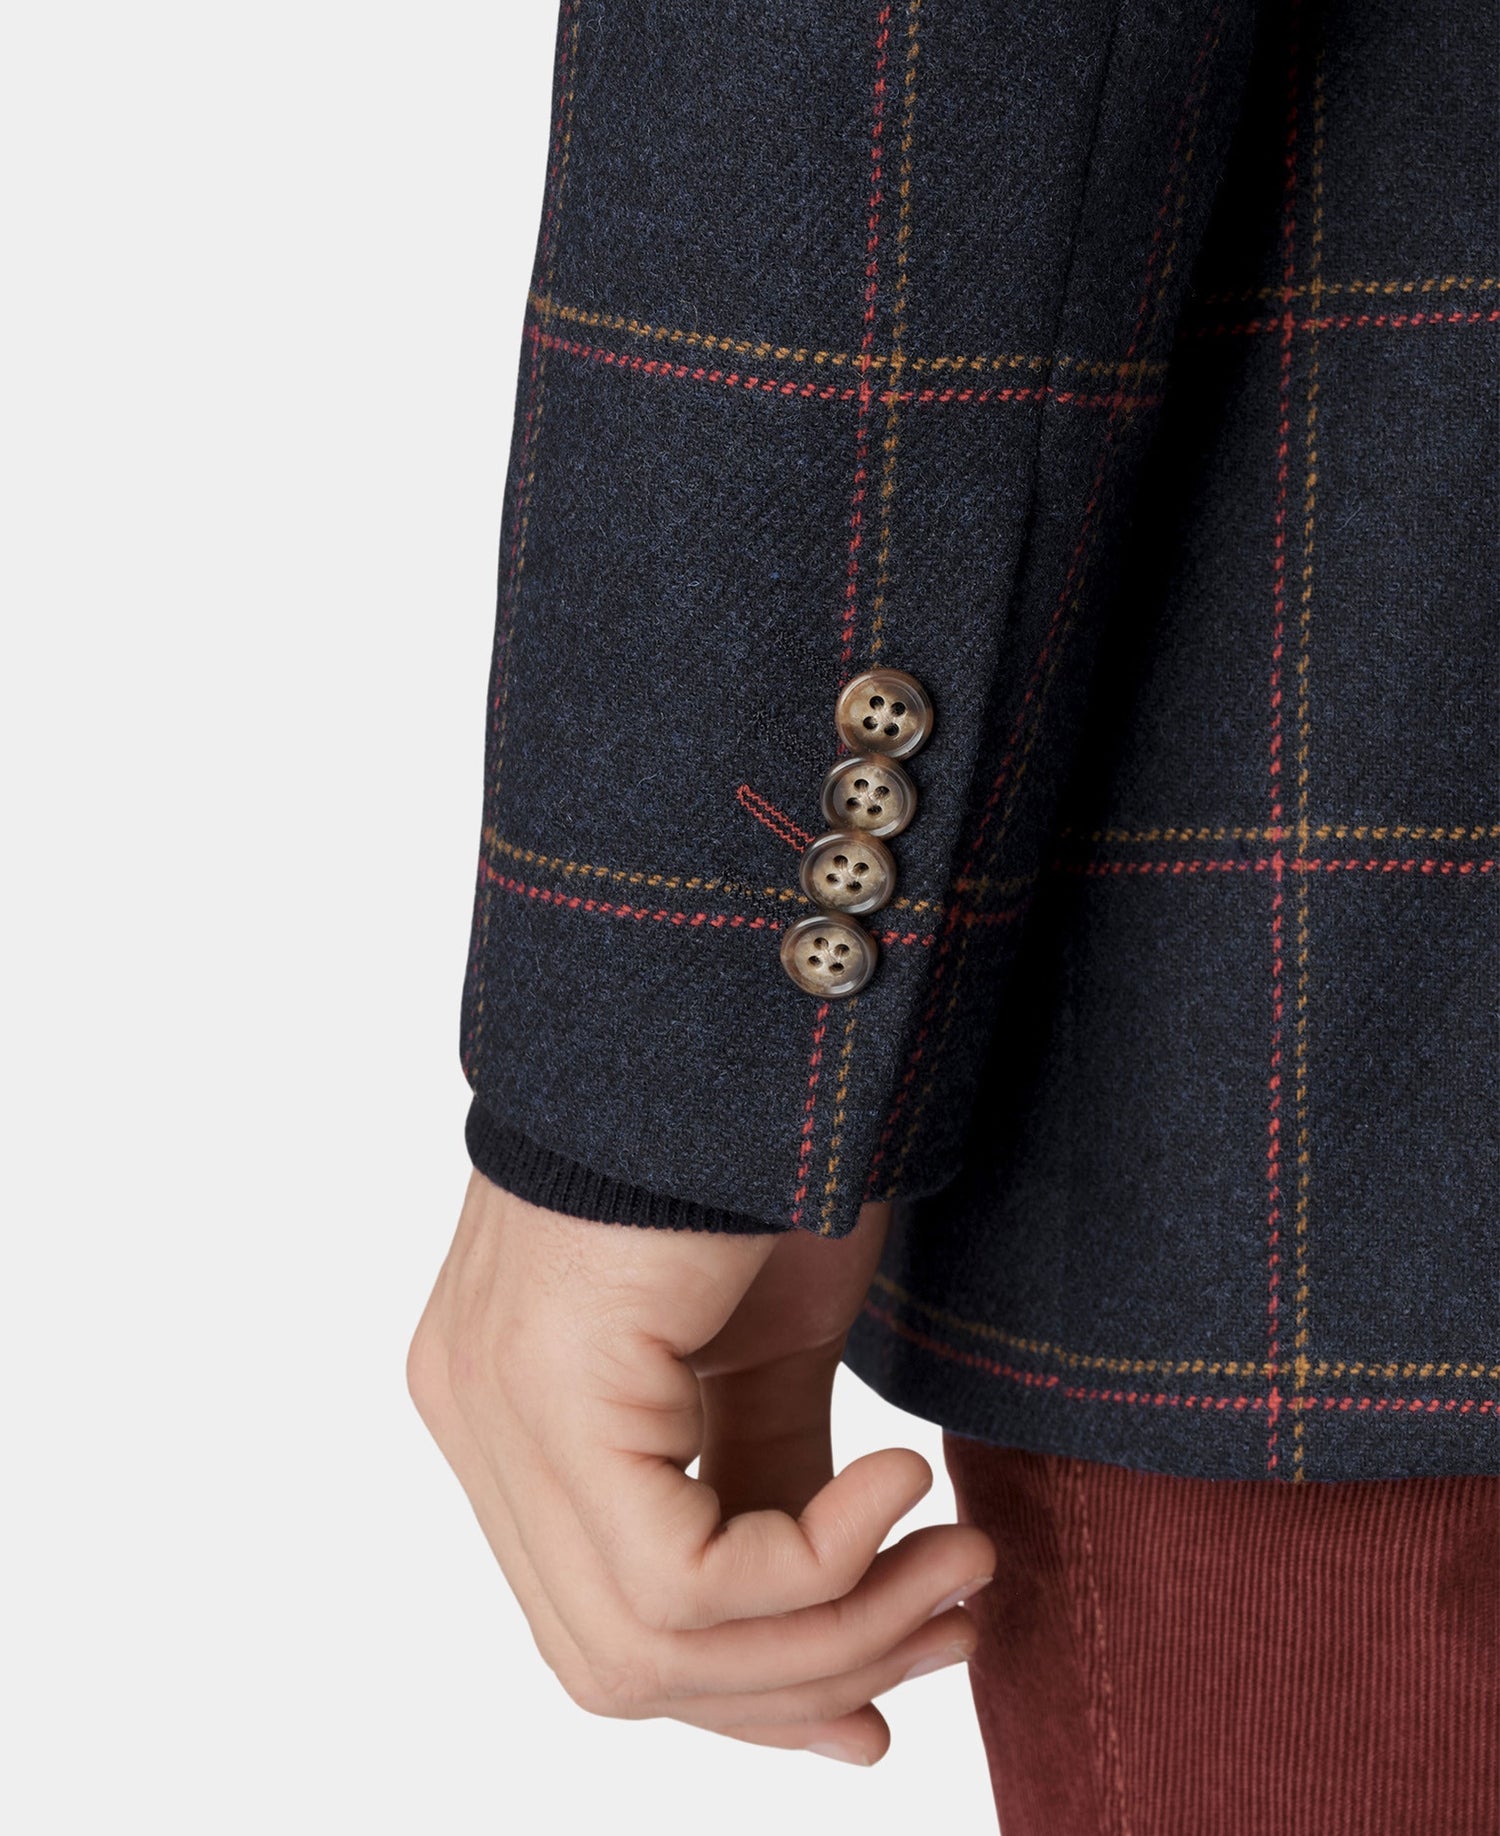 Airedale Check Tweed Jacket - Navy Check